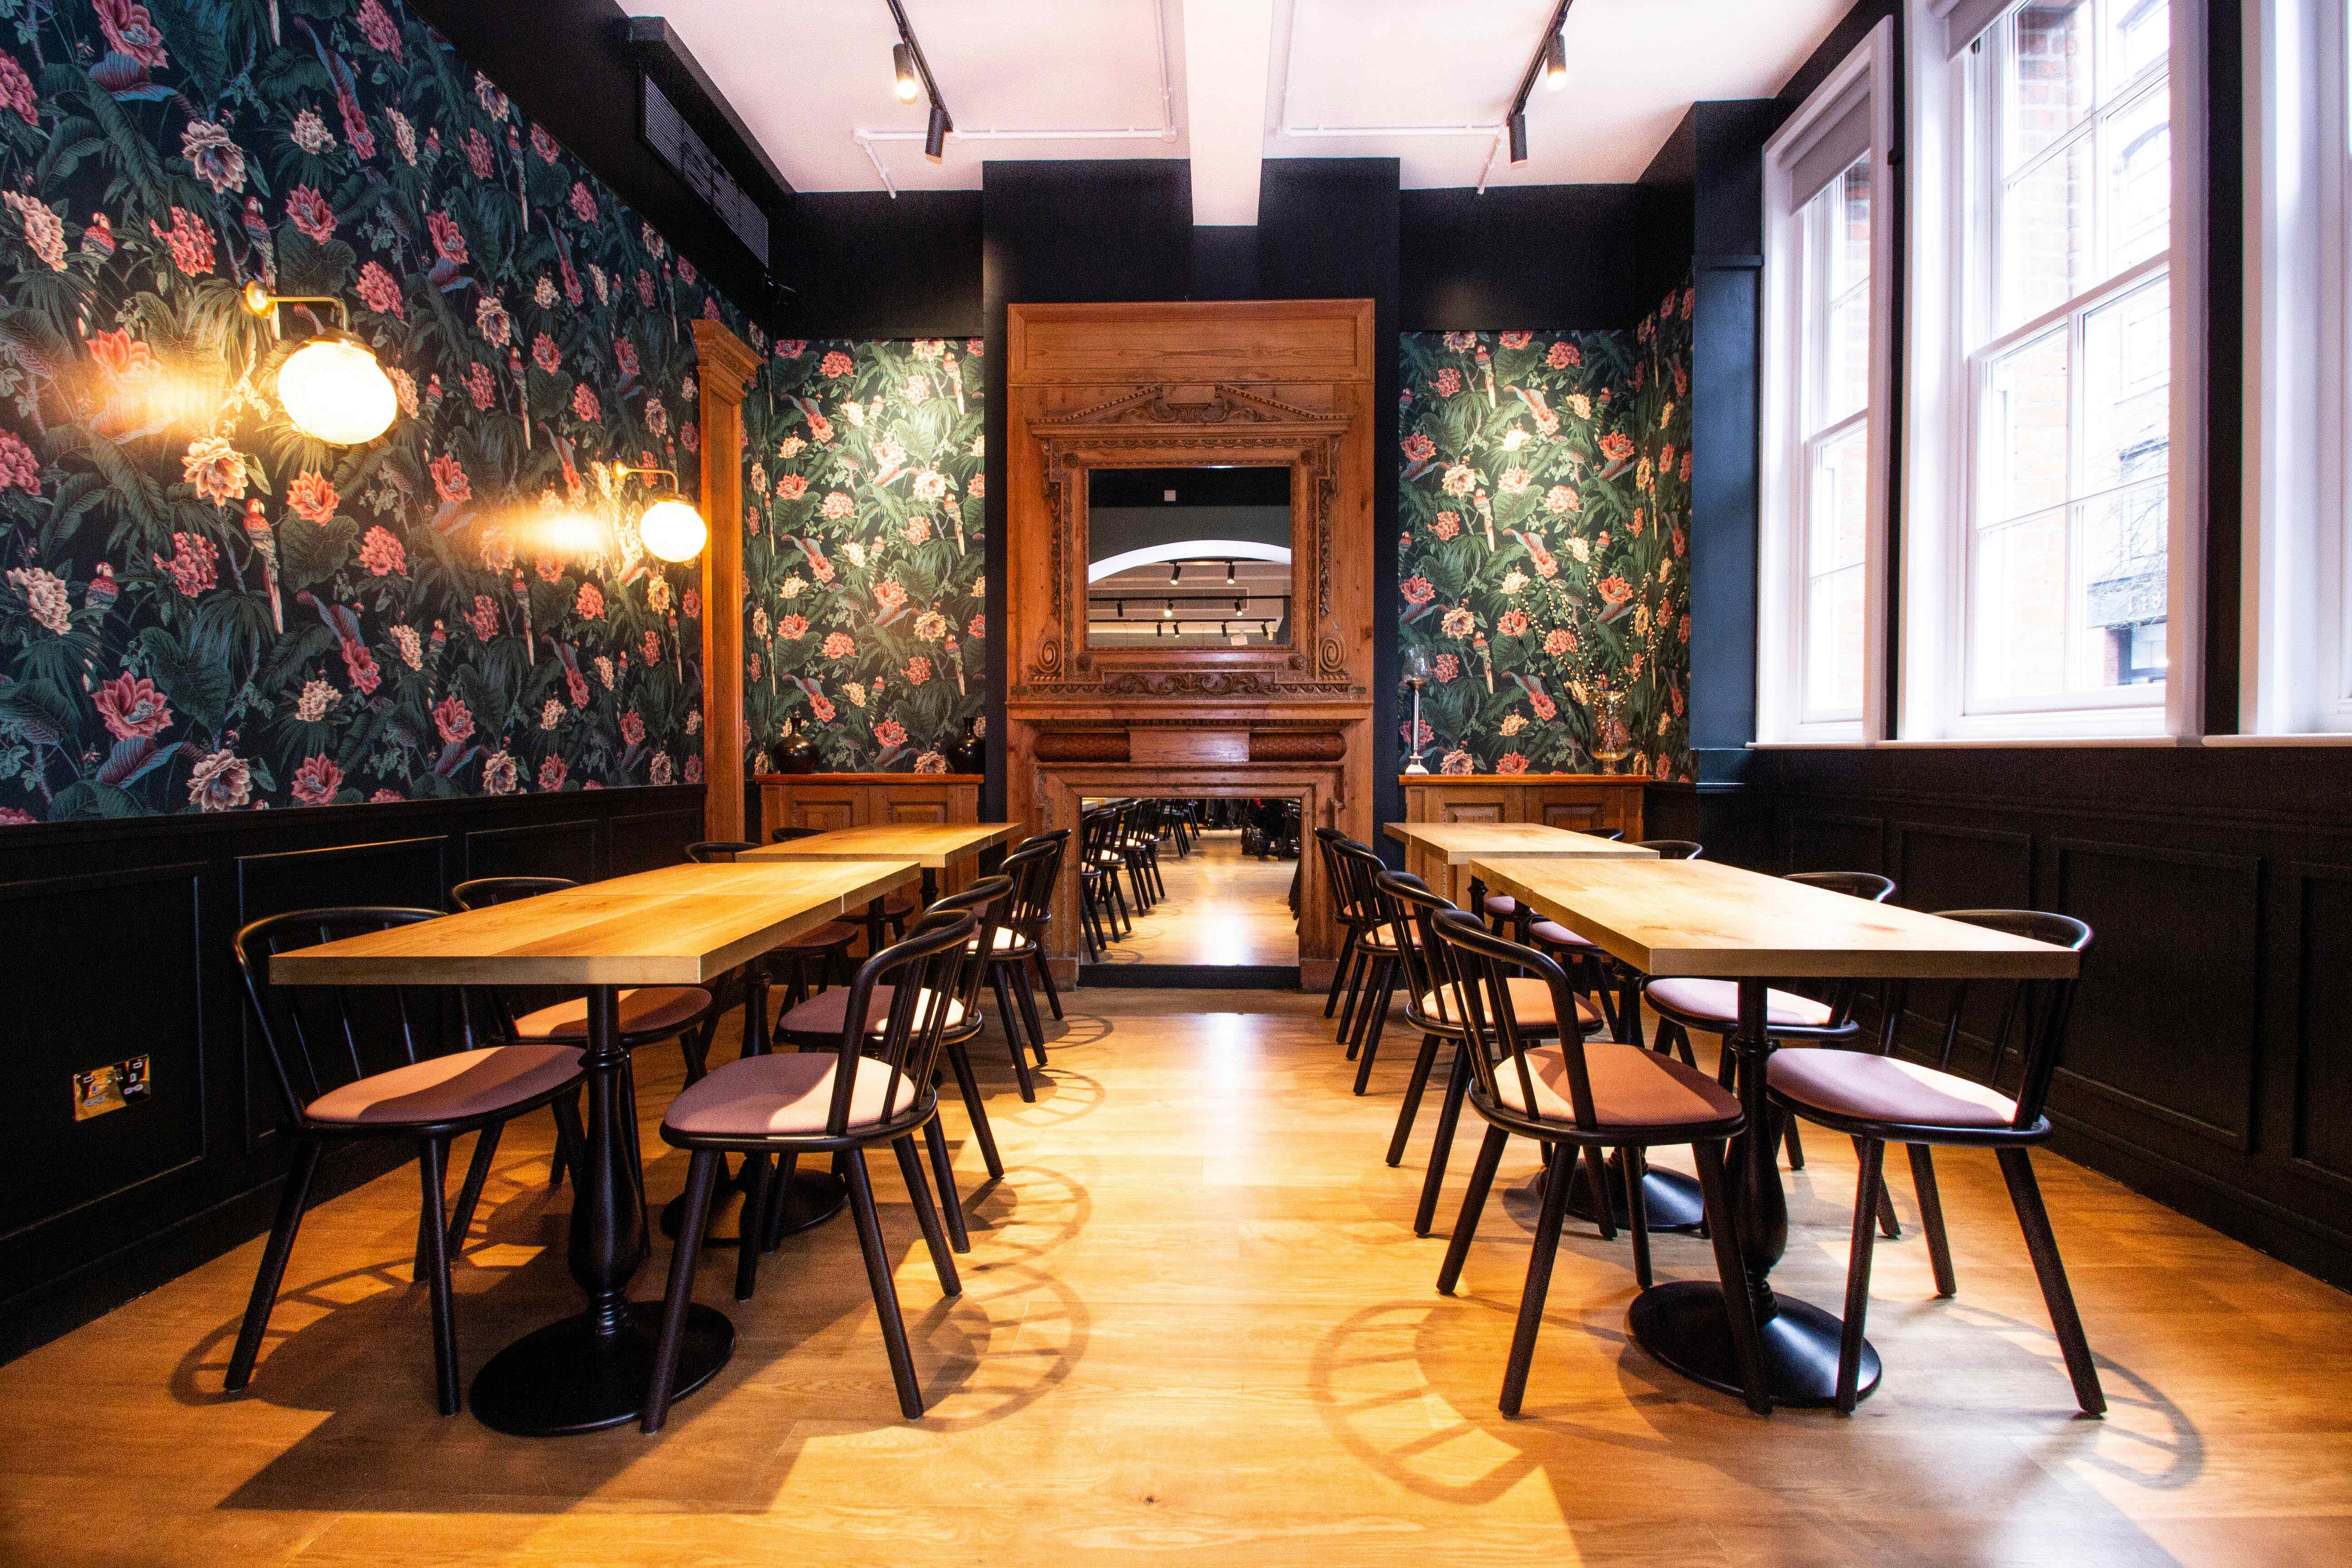 The Gallery, The Brigade Bar + Kitchen